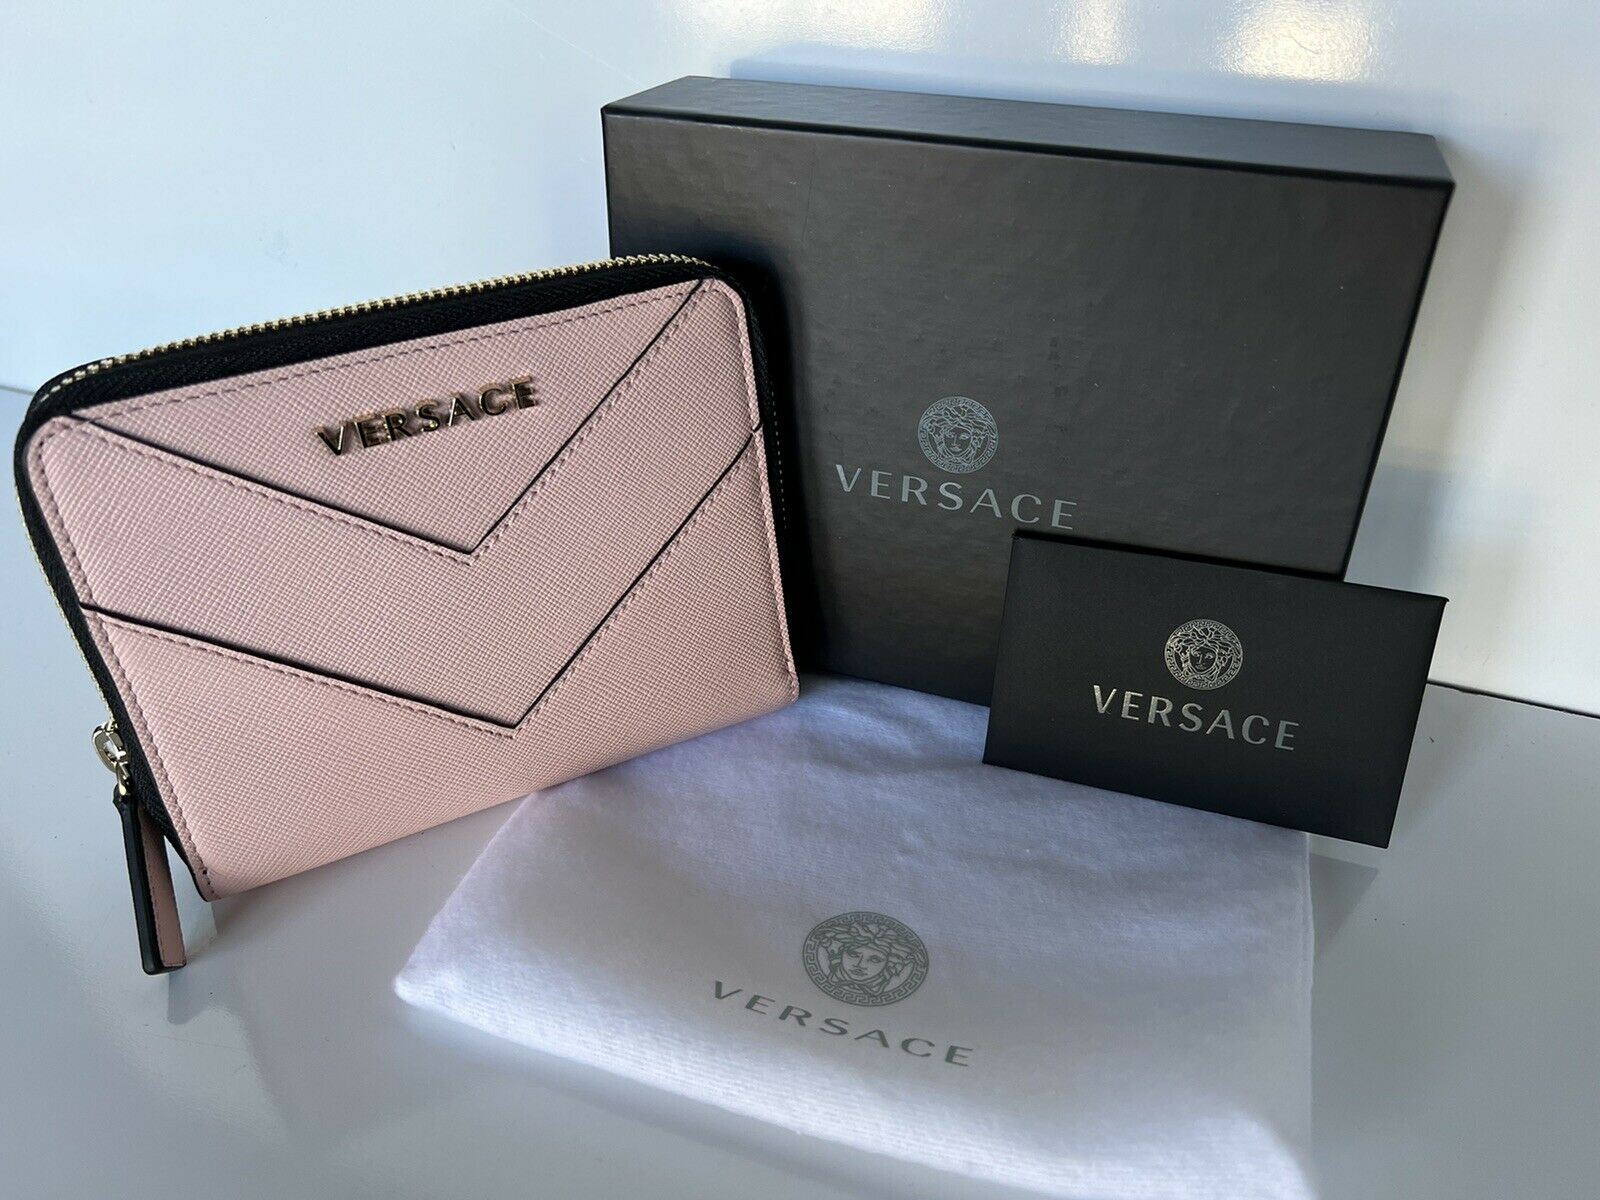 NWT Versace Blush Pink Calf Leather Medium Zipper Wallet Made in Italy 593